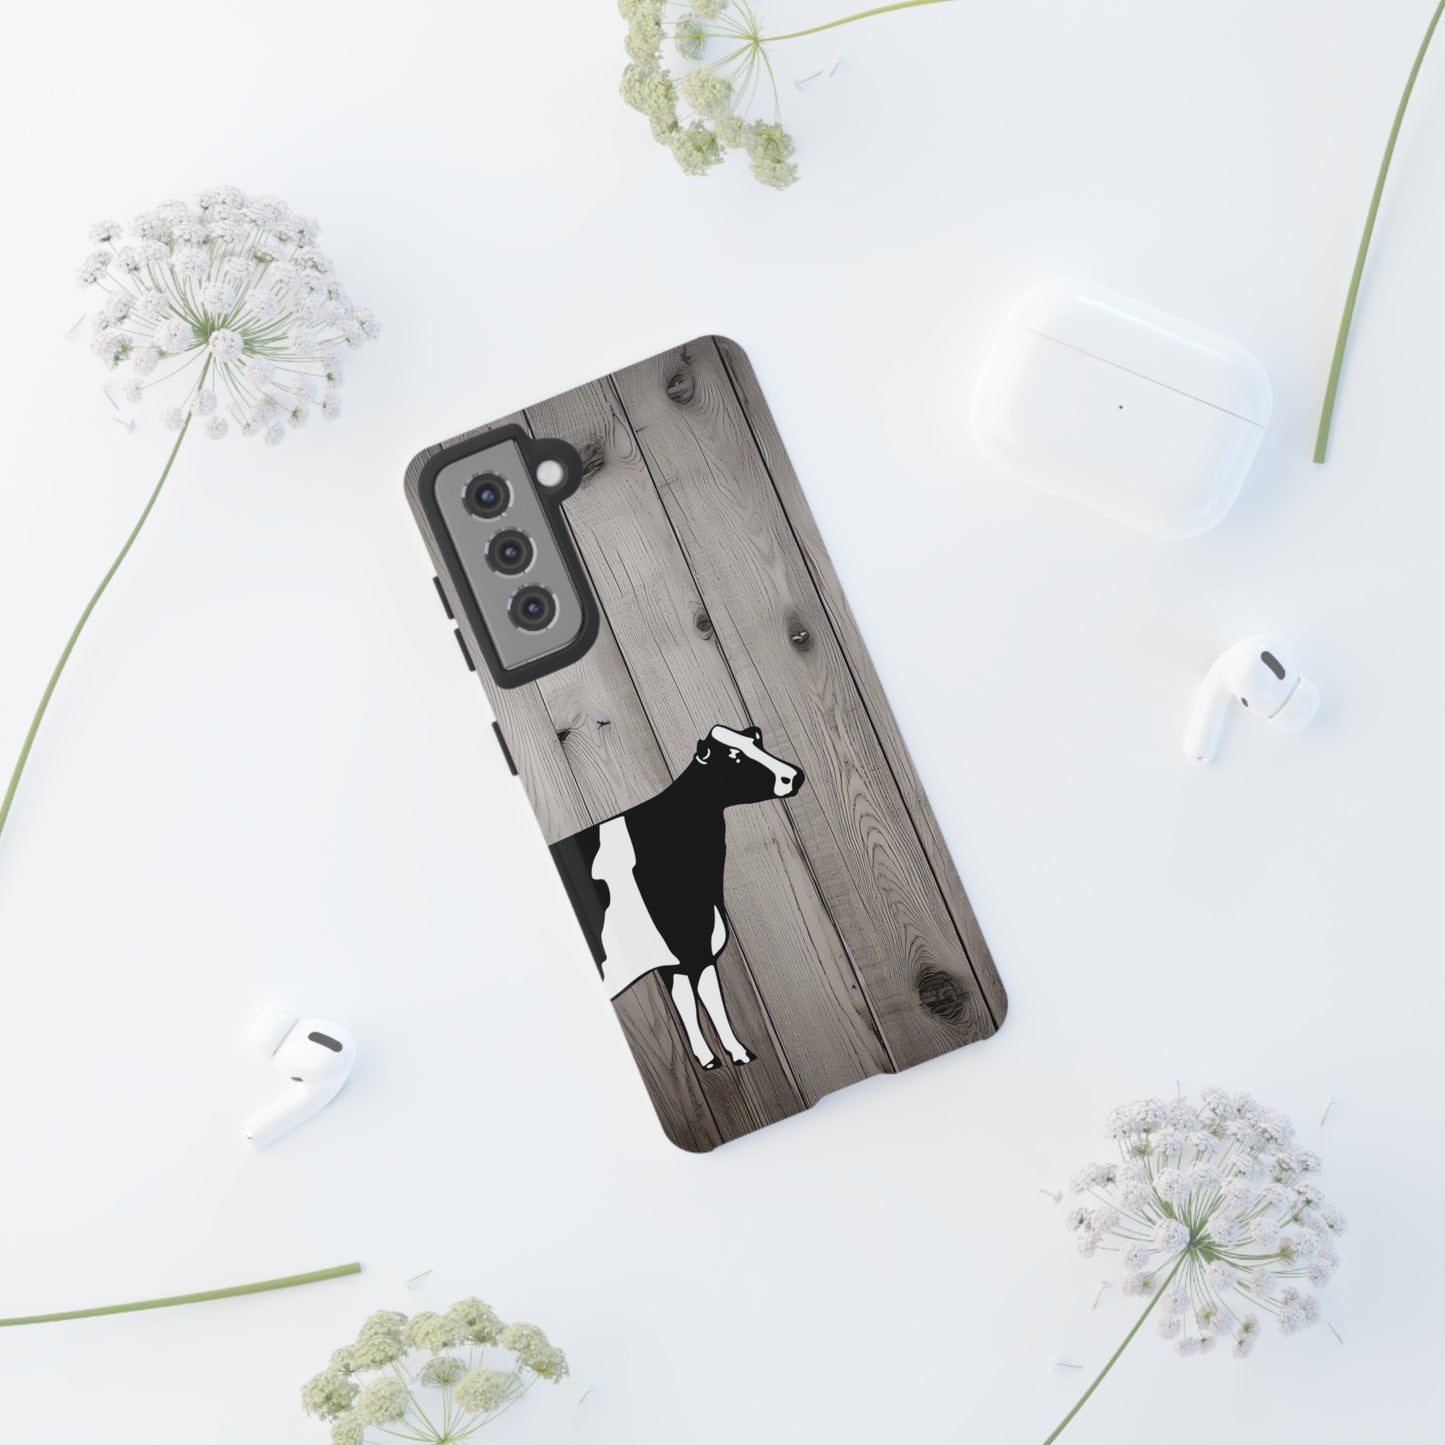 Livestock Show Cow Phone Cases - Livestock Show Dairy Cow - Android Cow Phone Cases-Wood Plank Background